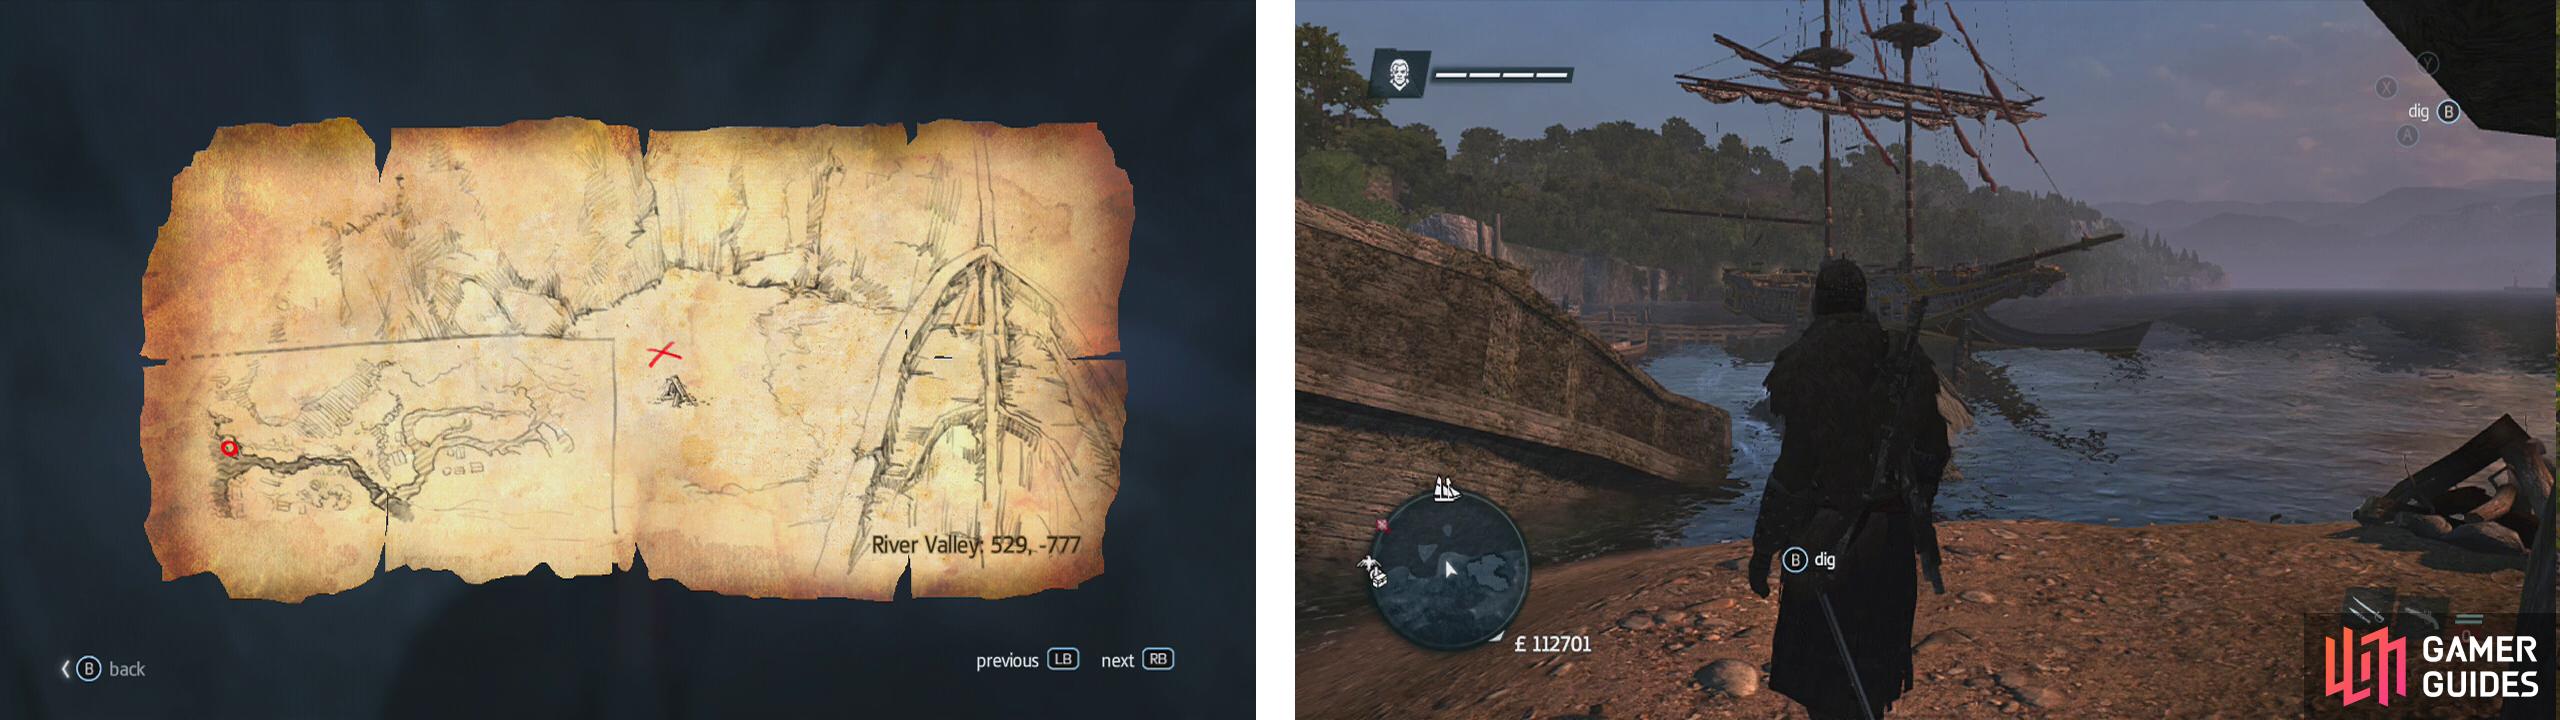 Go to the co-ordinates on the map (left) and find the location drawn (right) to find a dig spot.